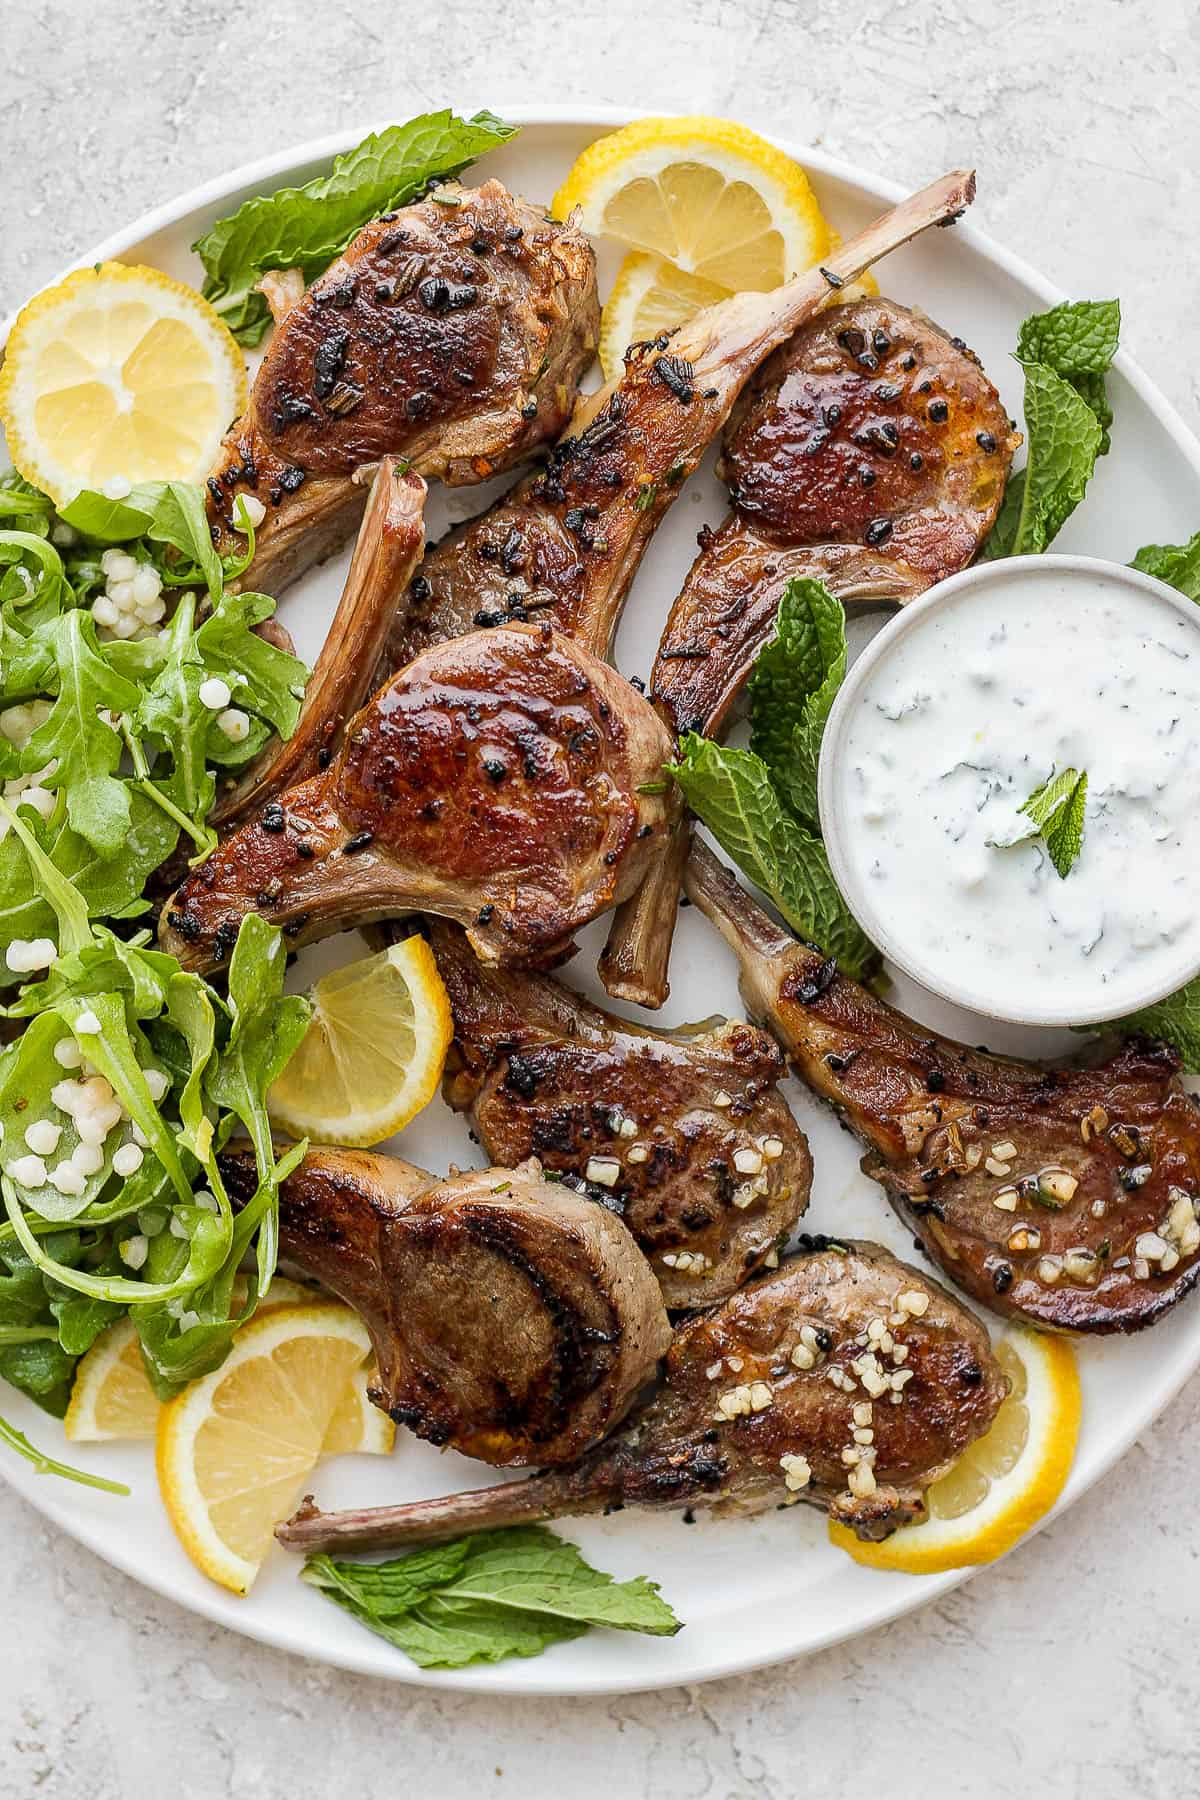 Pan-seared lamb chops on a plate with a salad, couscous, and lamb sauce.